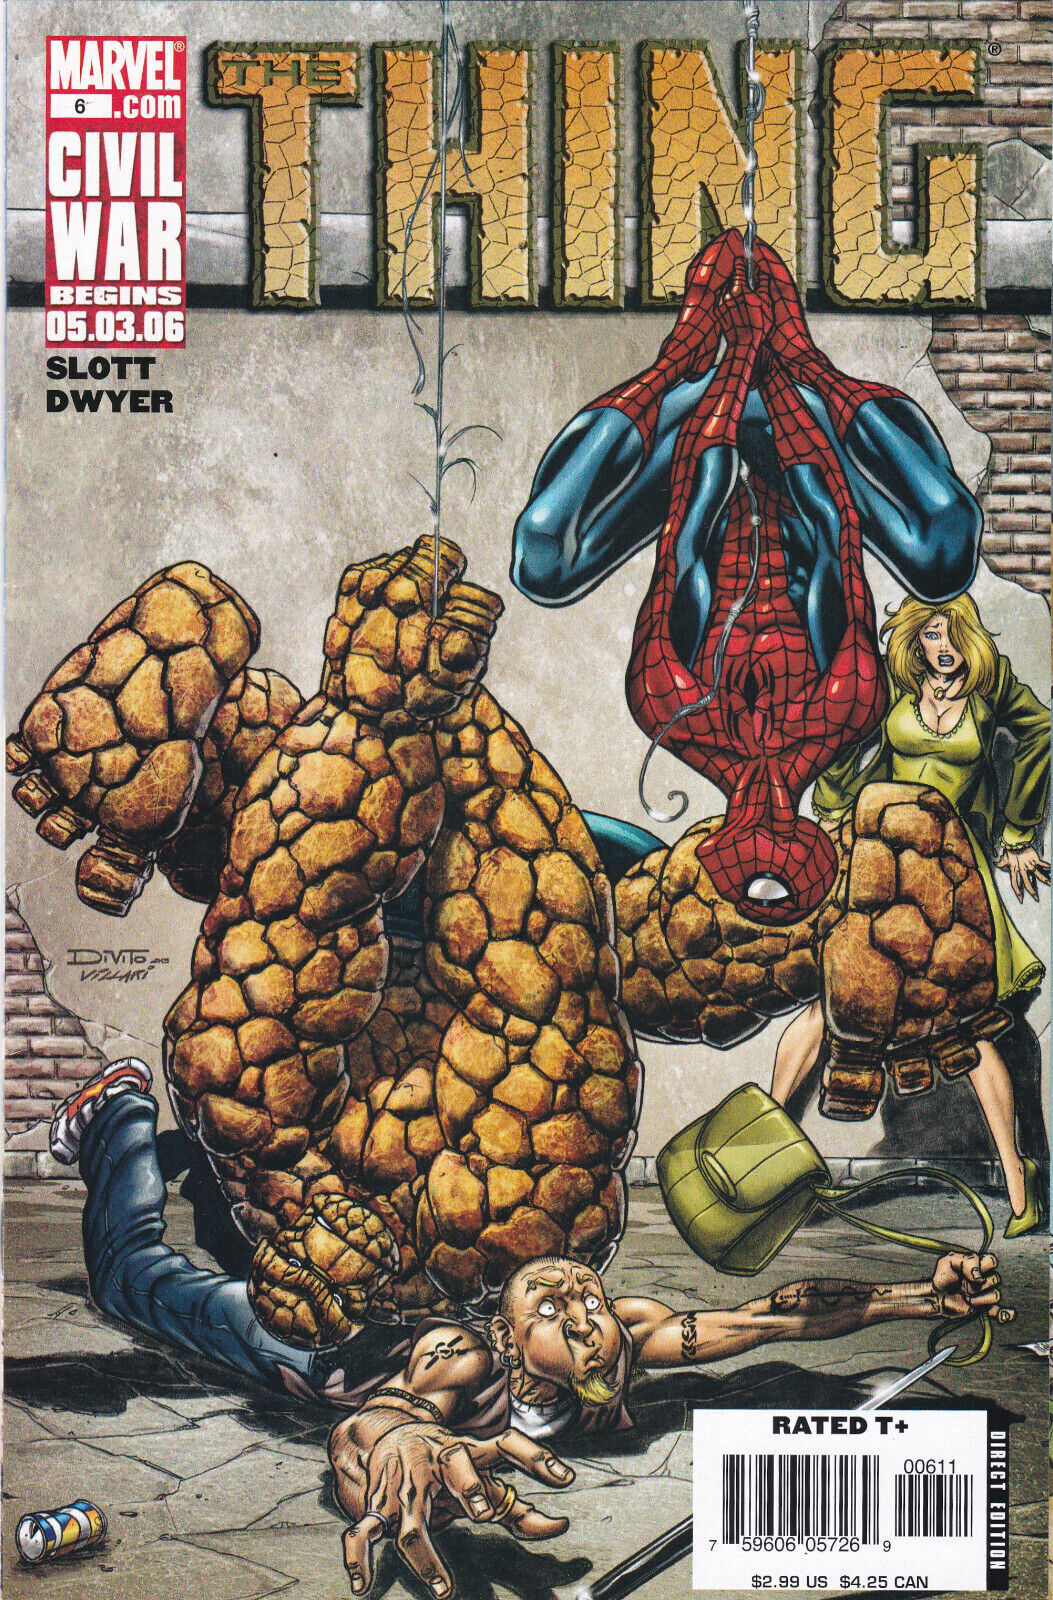 The Thing #6 2006 Marvel Spider-Man Fantastic Four Damage Control High Grade